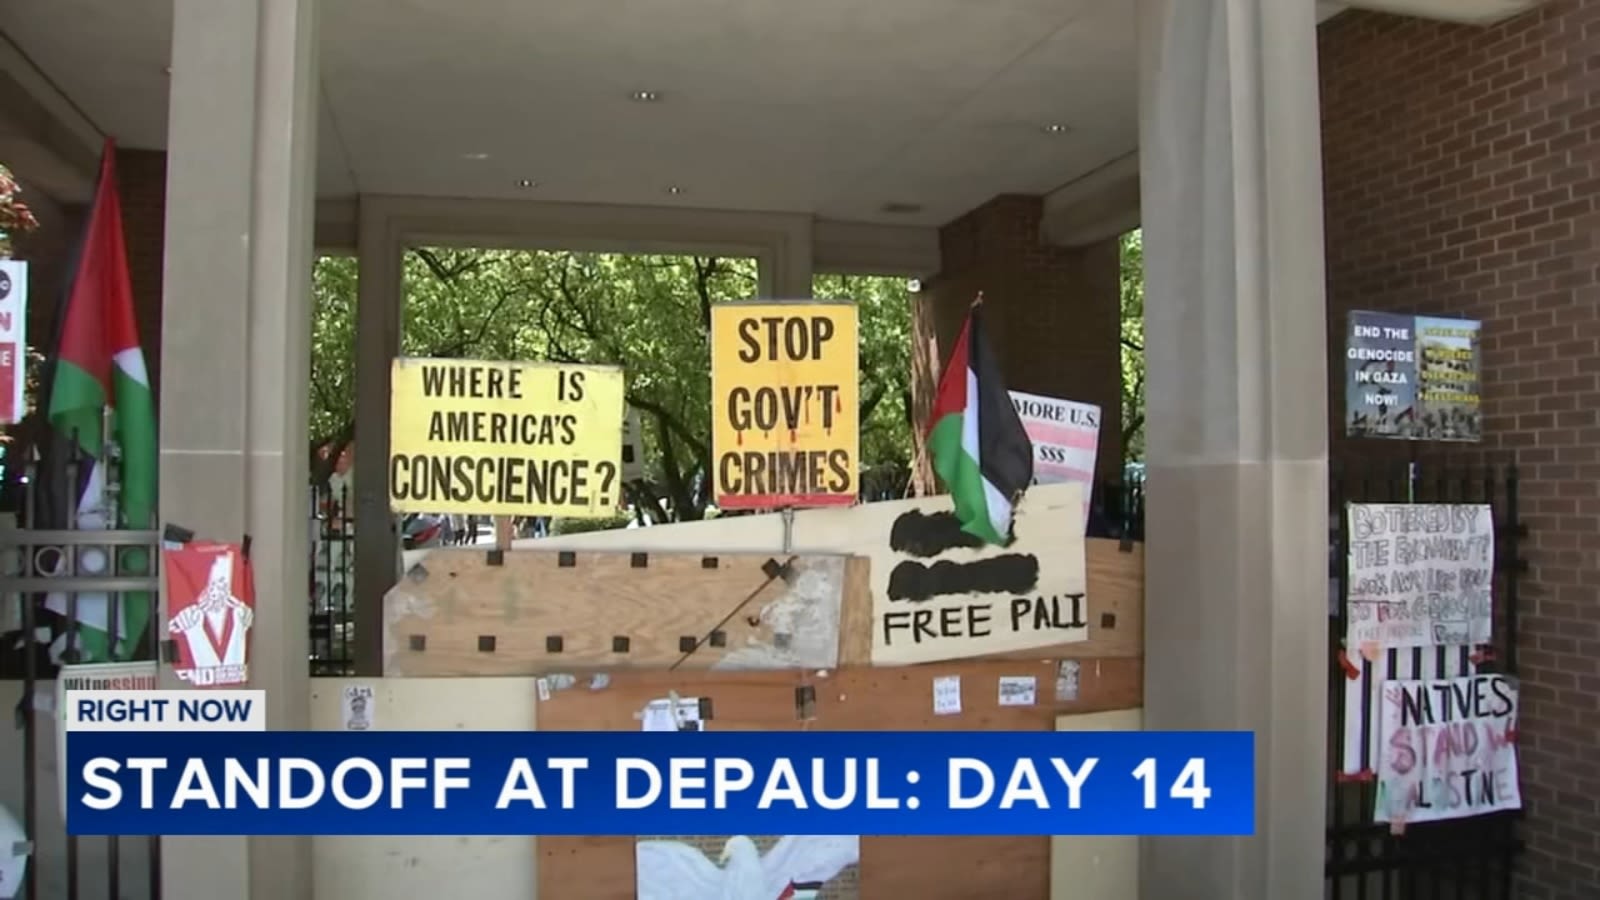 DePaul pro-Palestinian encampment reaches 2-week mark, as protesters refuse to leave quad